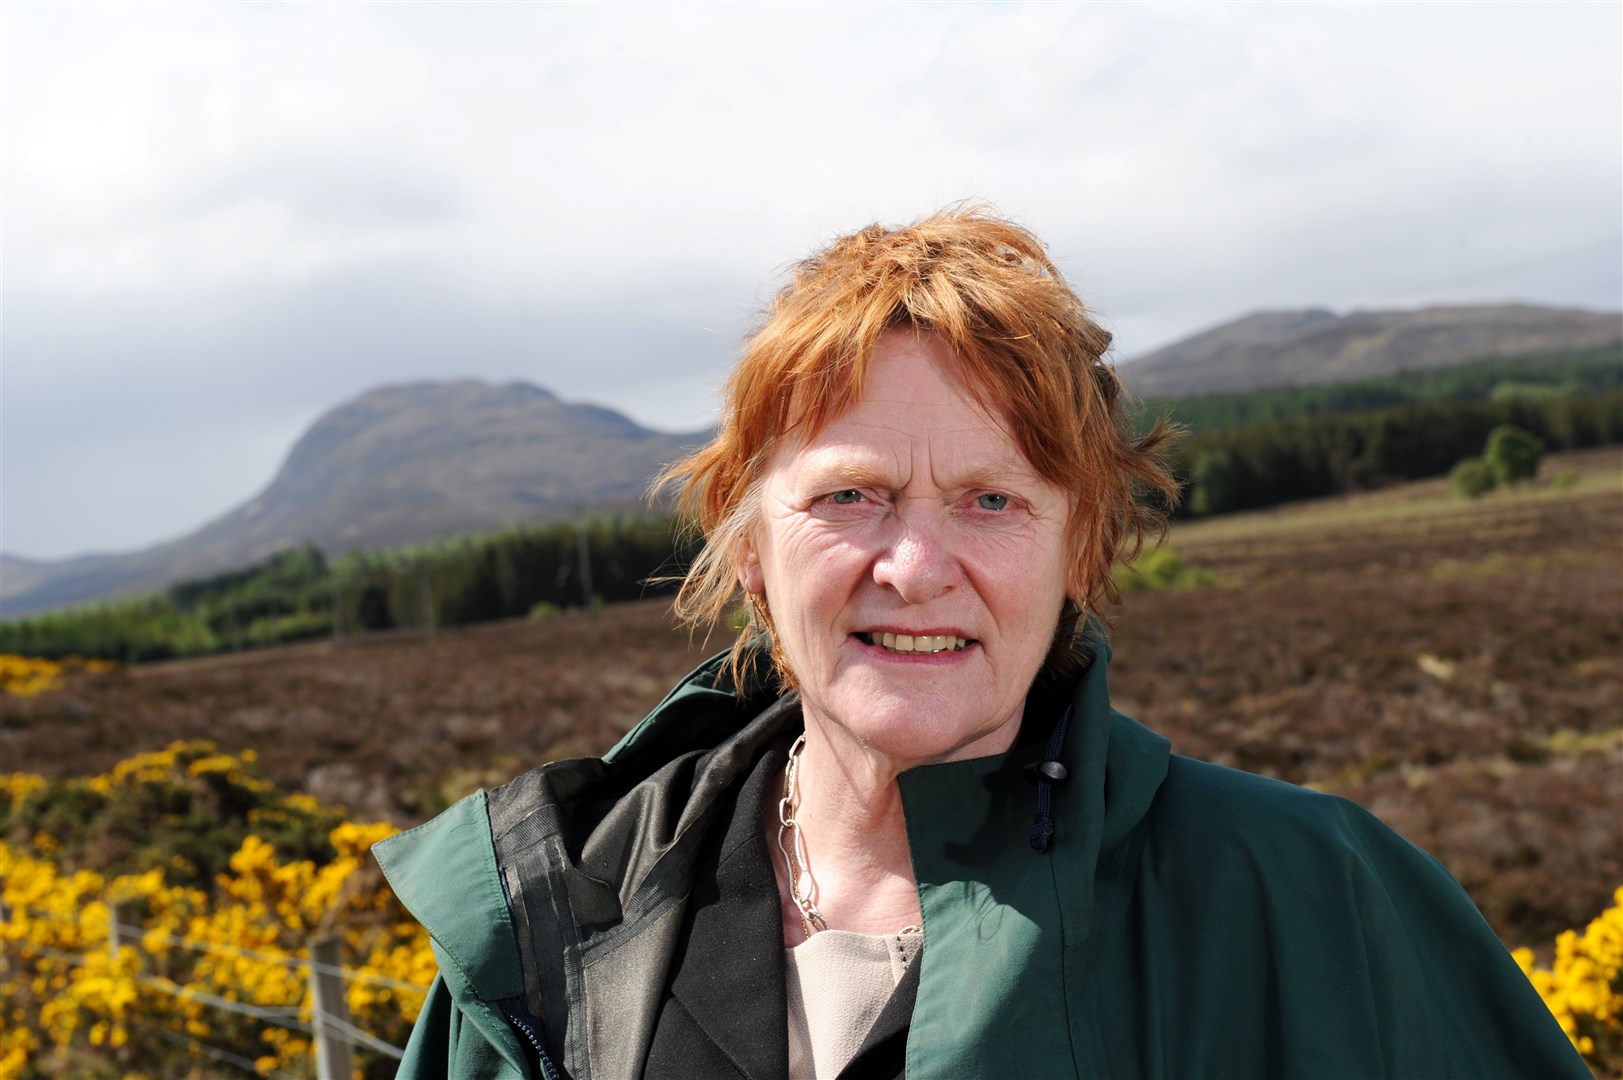 Cllr Margaret Davidson has issued an appeal, acknowledging the importance of tourism to the Highlands but condemning instances of littering which have also included human waste.